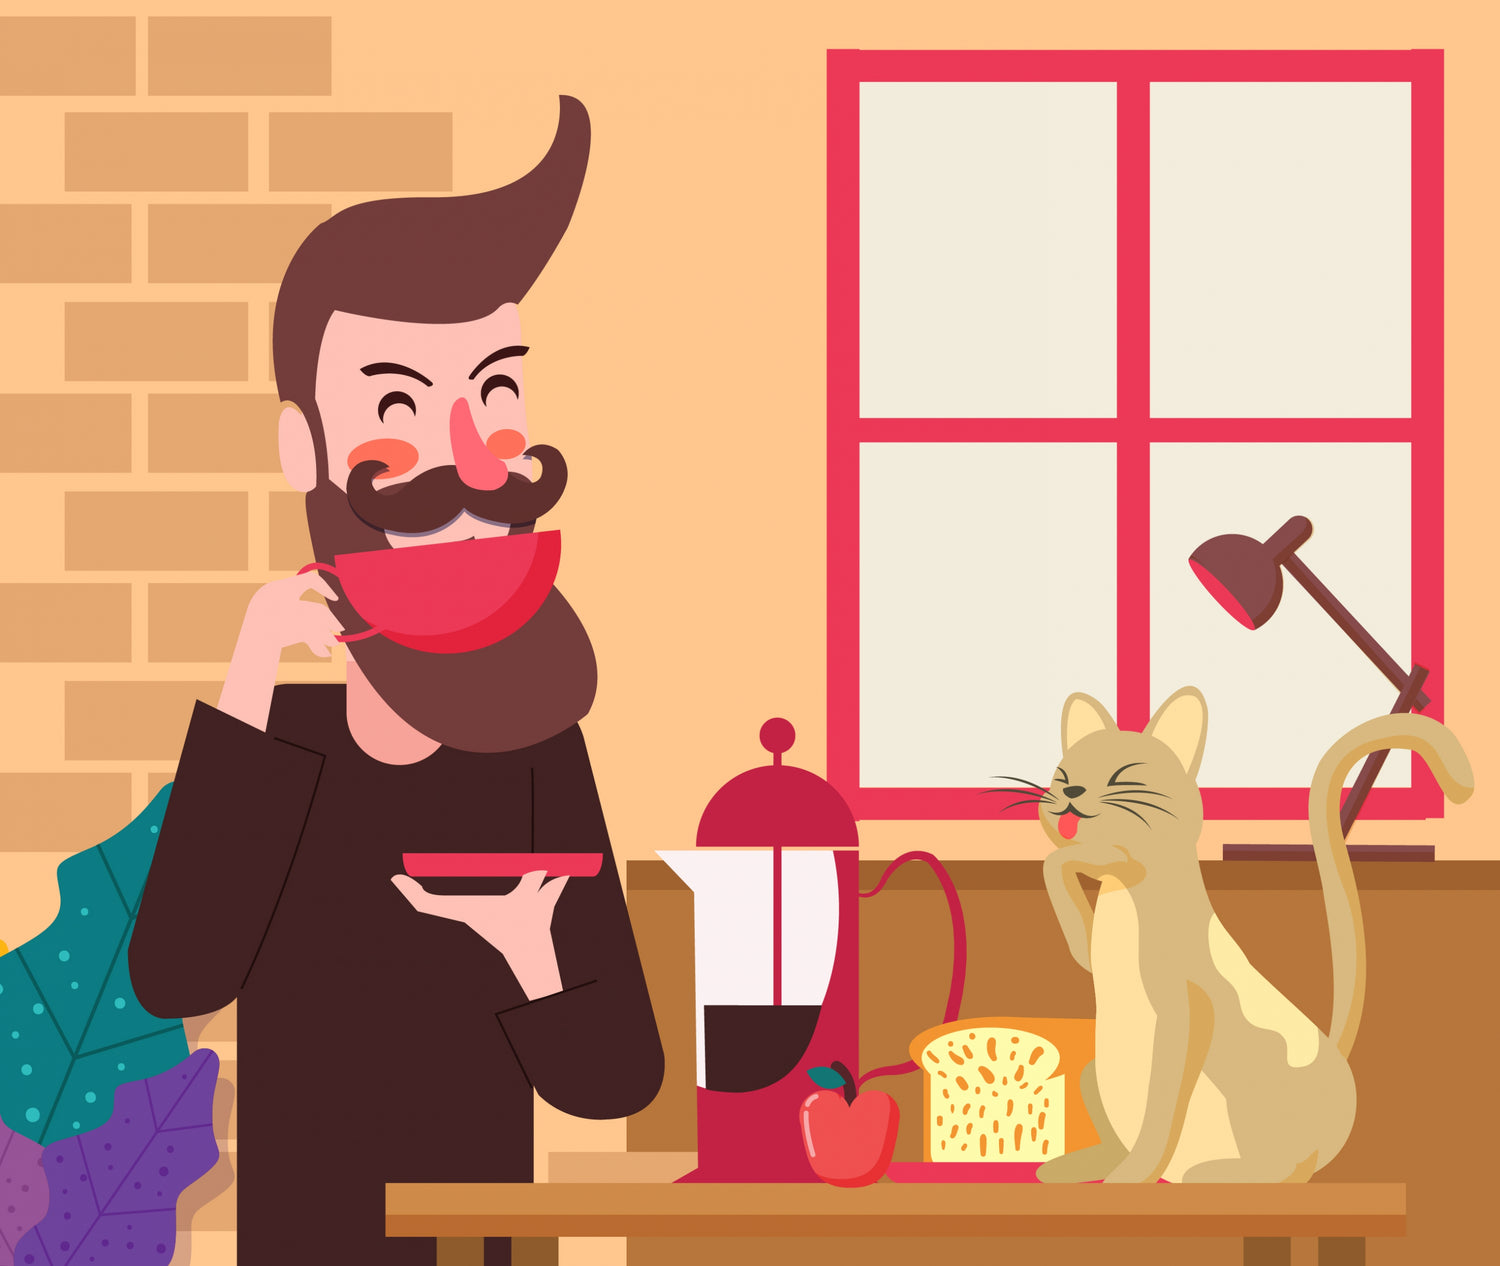 Vector image of a man drinking espresso with his cat sticking out tongue. Author: https://all-free-download.com/